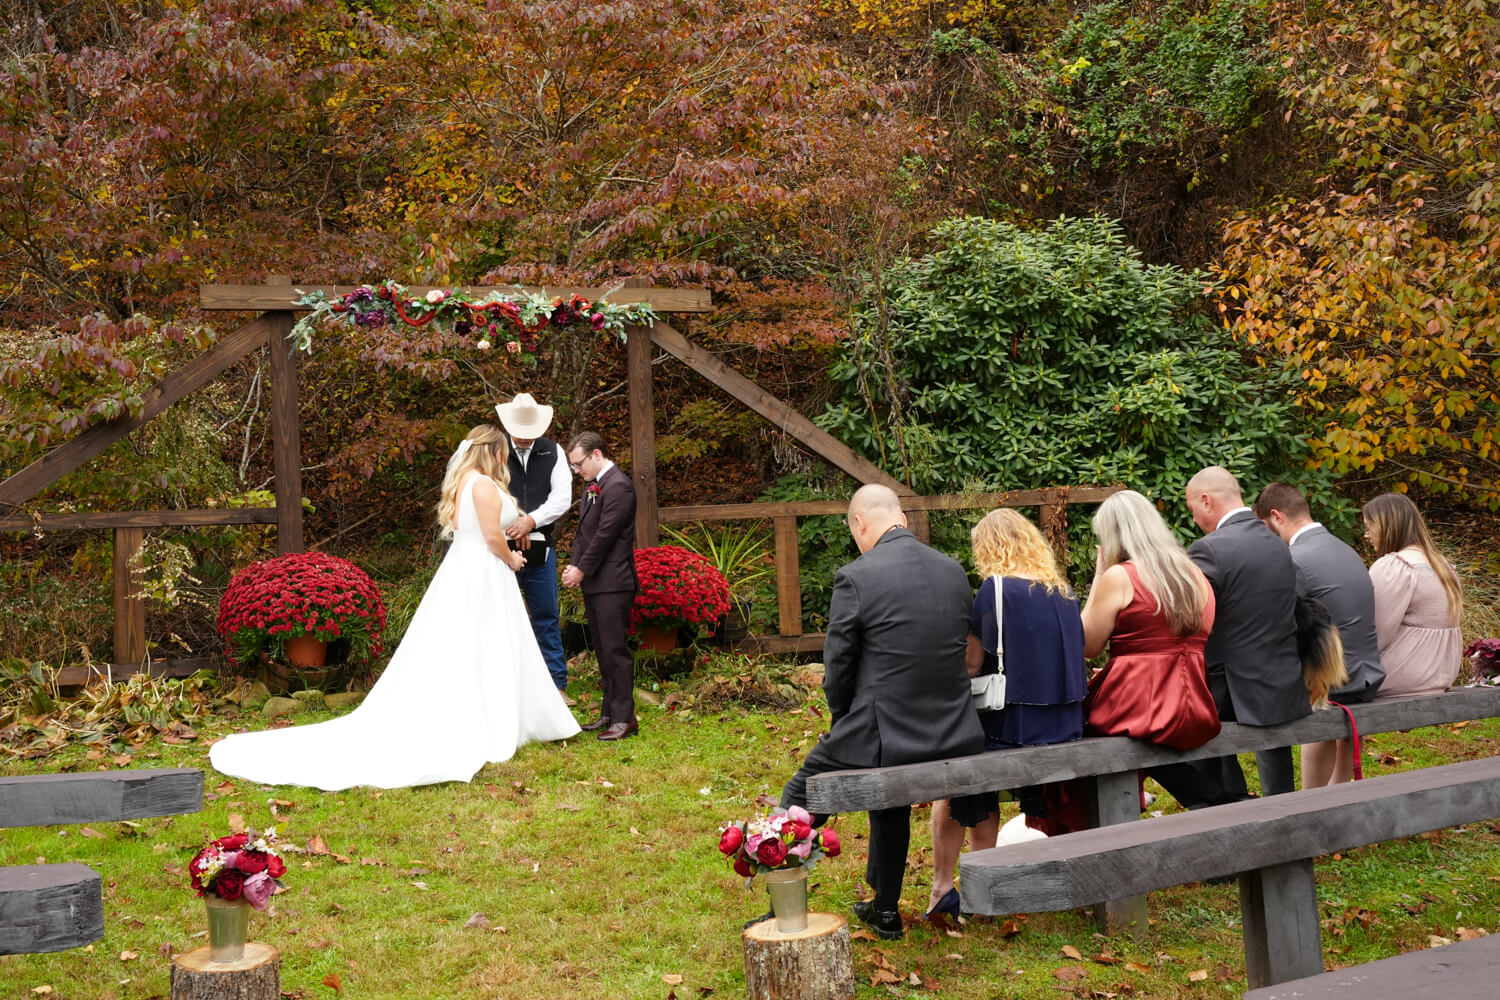 October fall wedding at a wooden arbor in the Smoky Mountains Tennessee